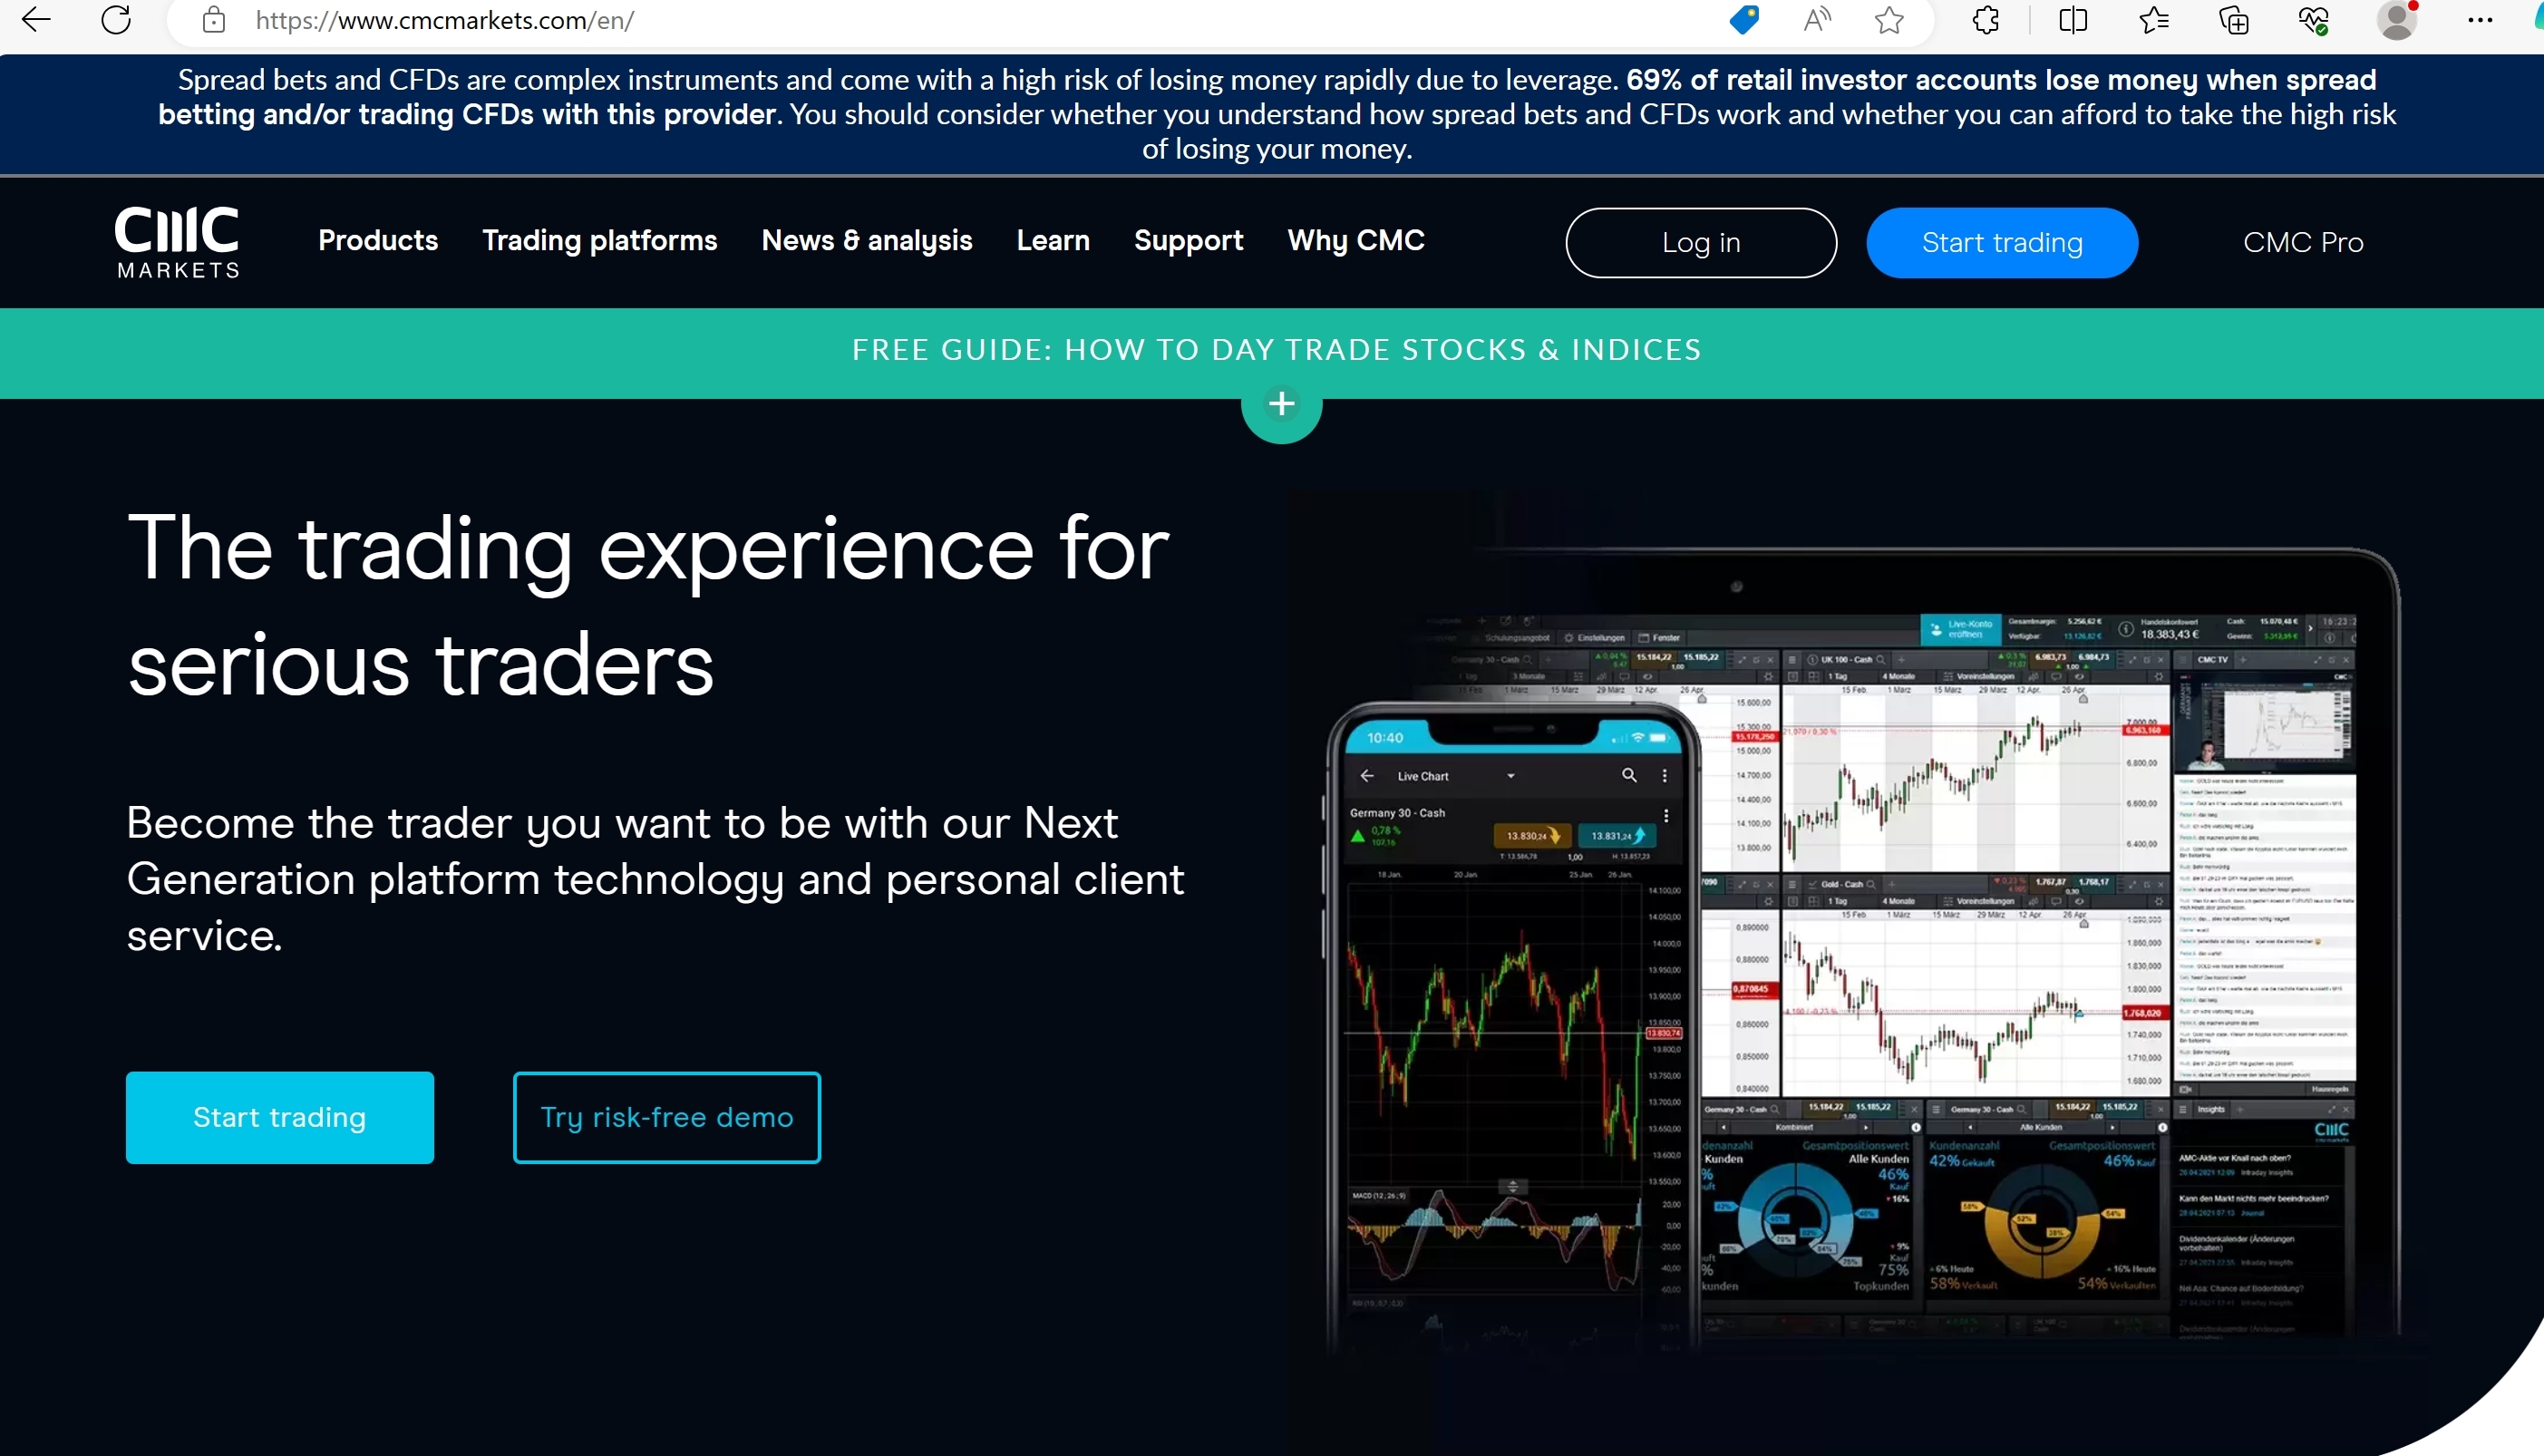 CMC Markets' home page